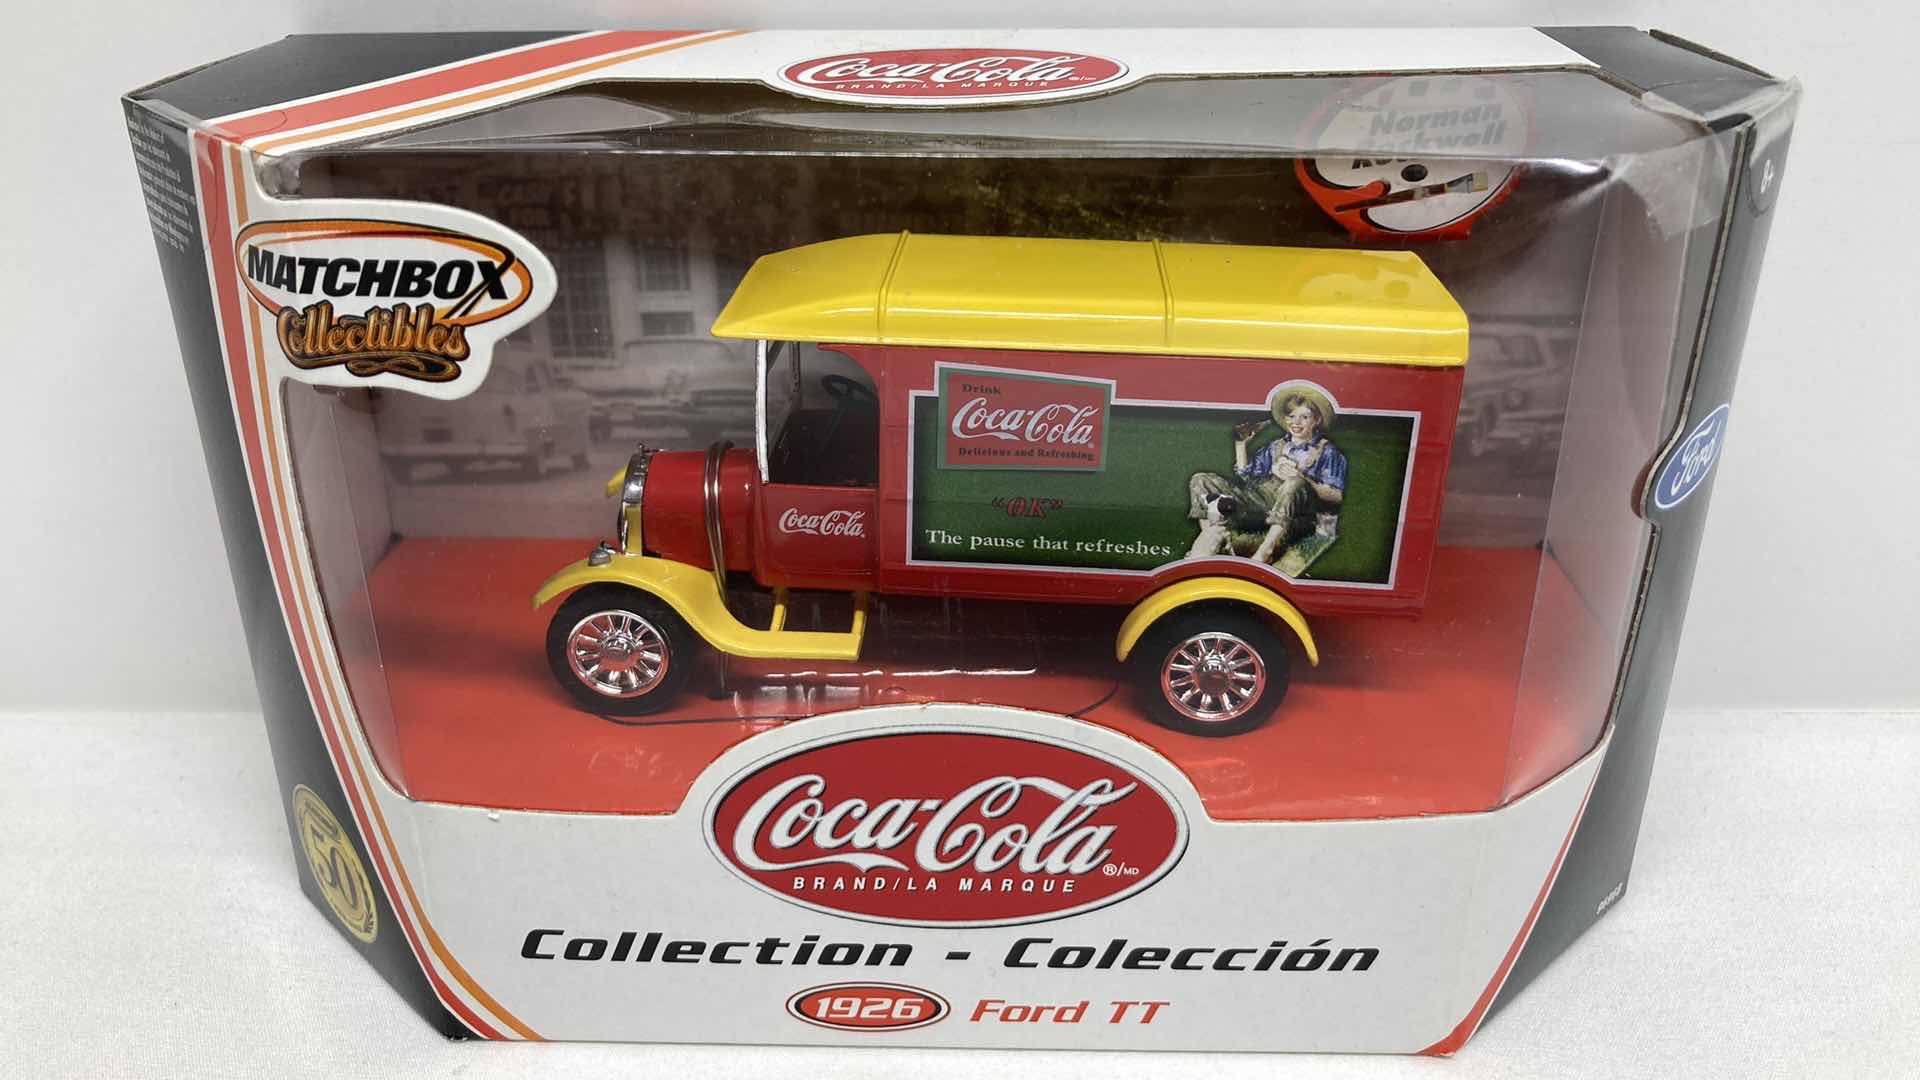 Photo 1 of MATCHBOX COLLECTIBLES COCA-COLA 1926 FORD TT NORMAN ROCKWELL TRUCK